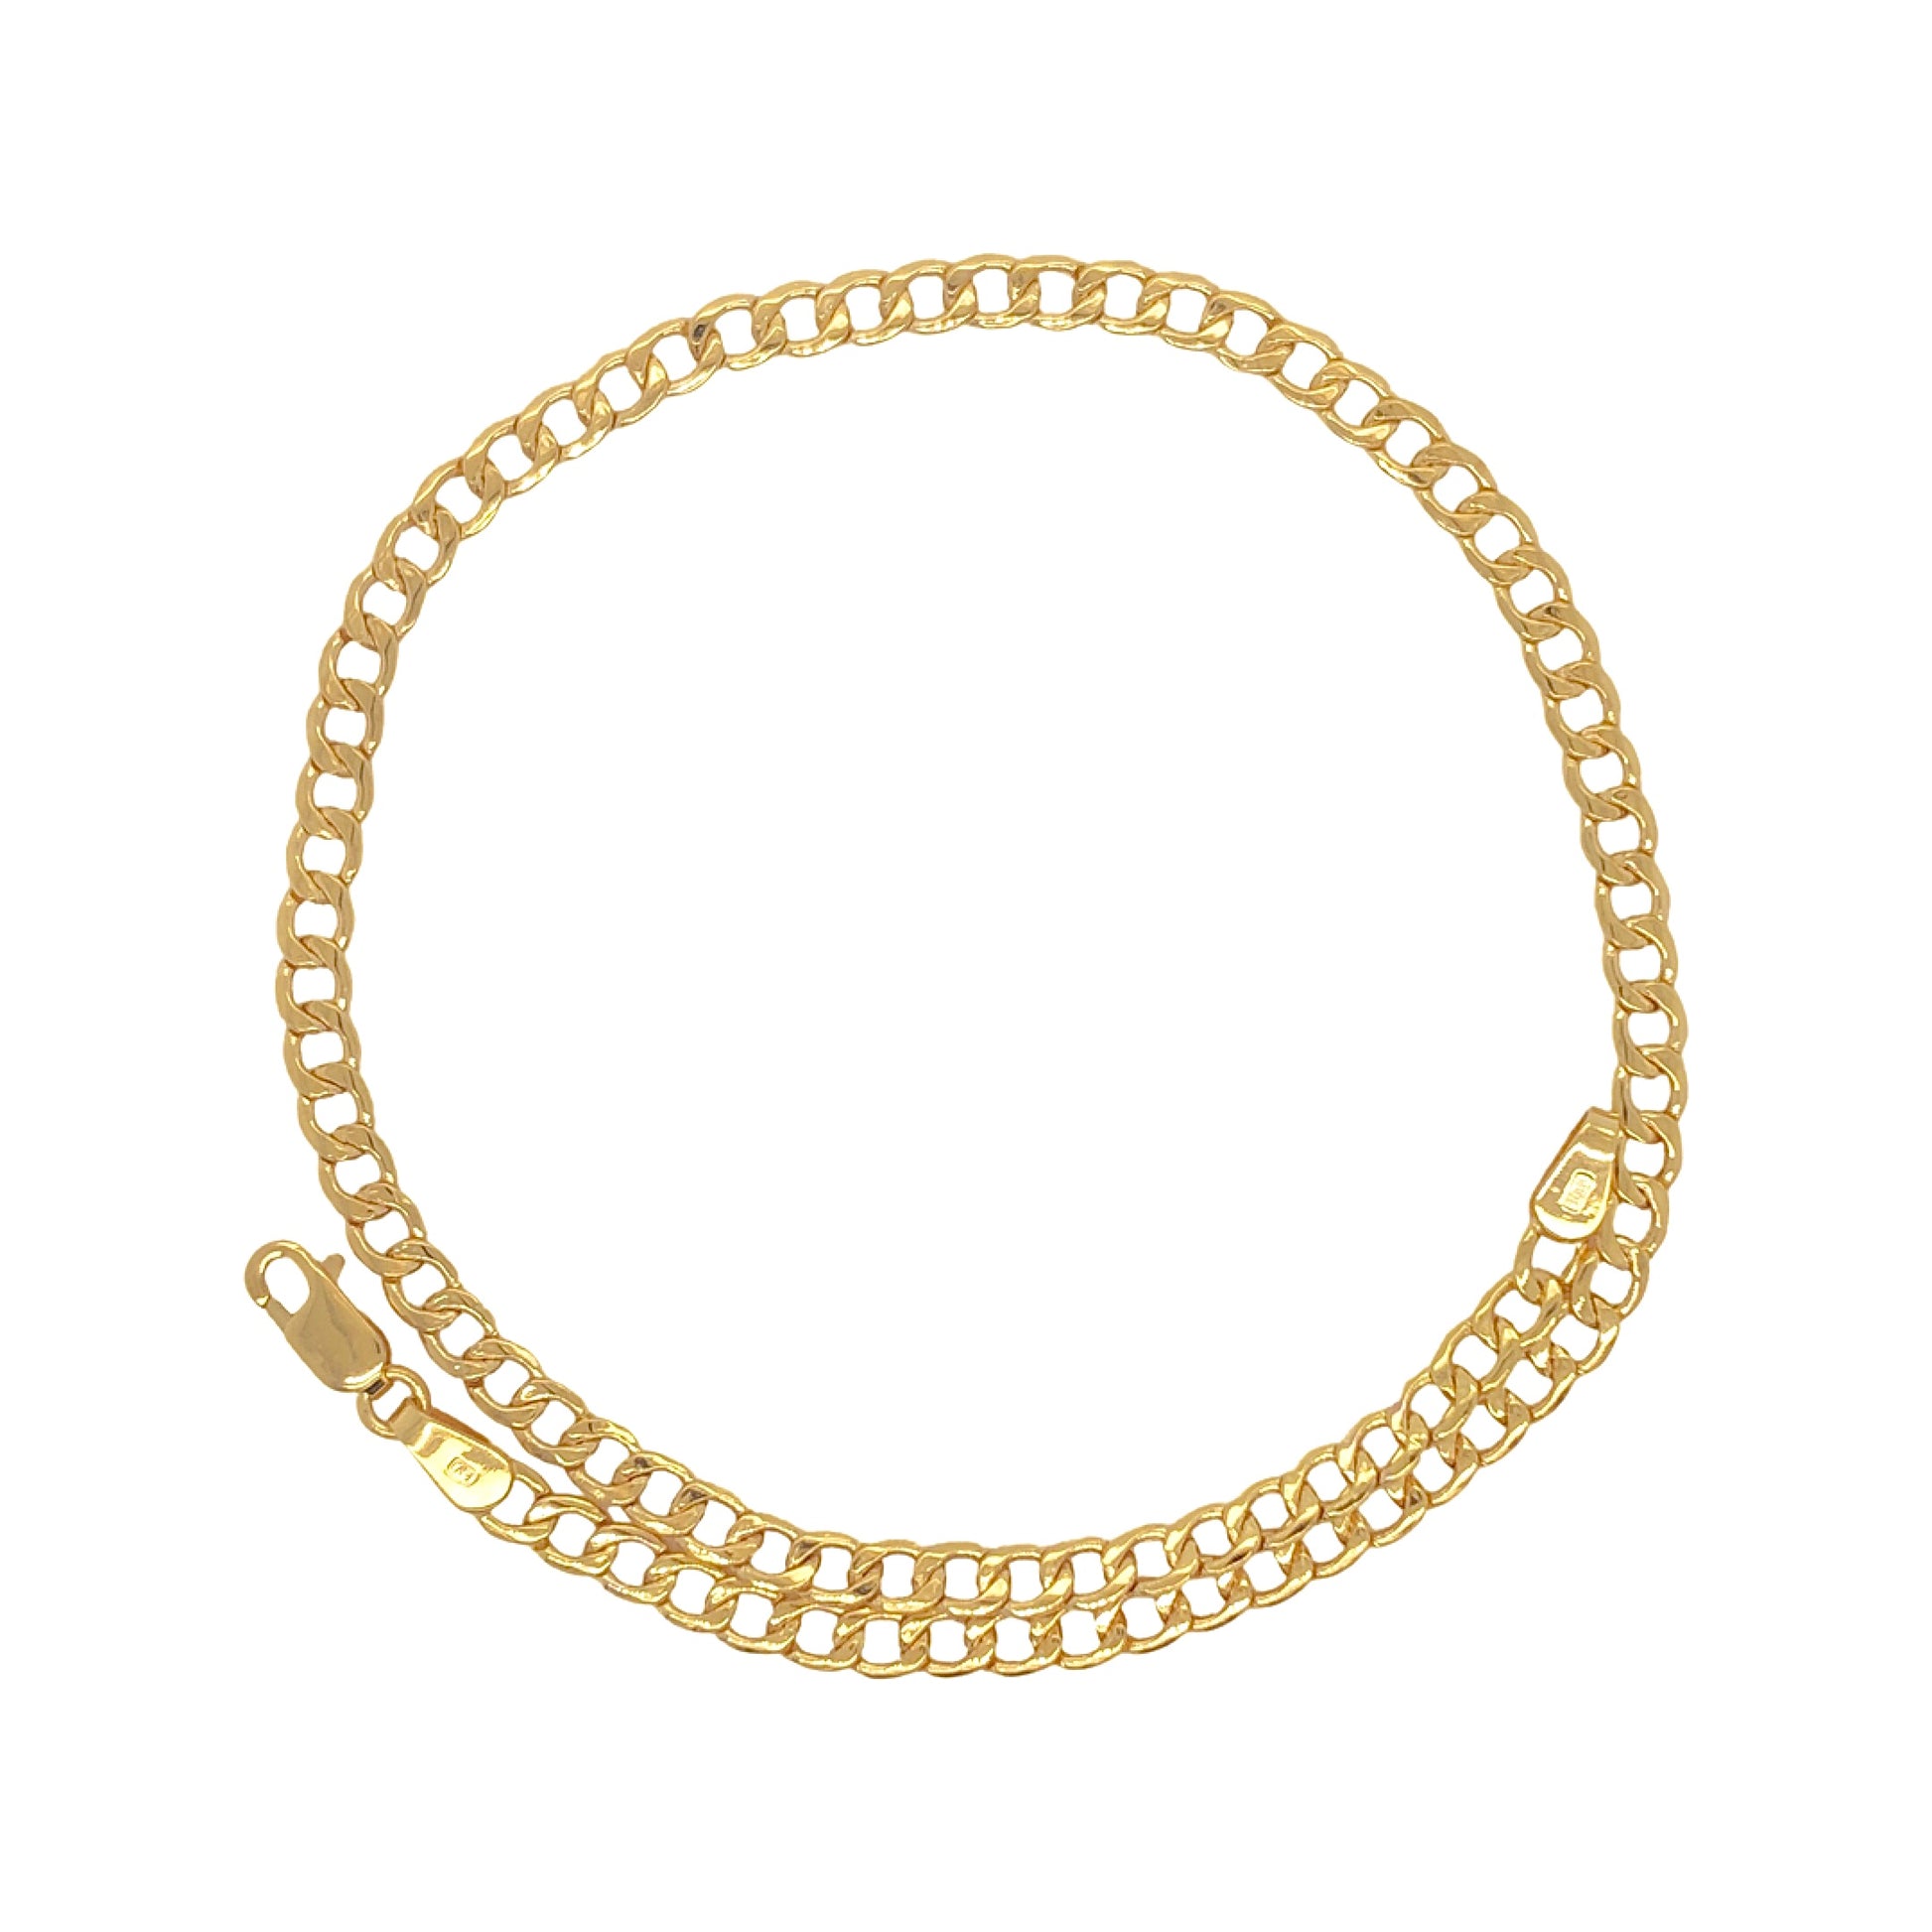 10k yellow gold curb link anklet 